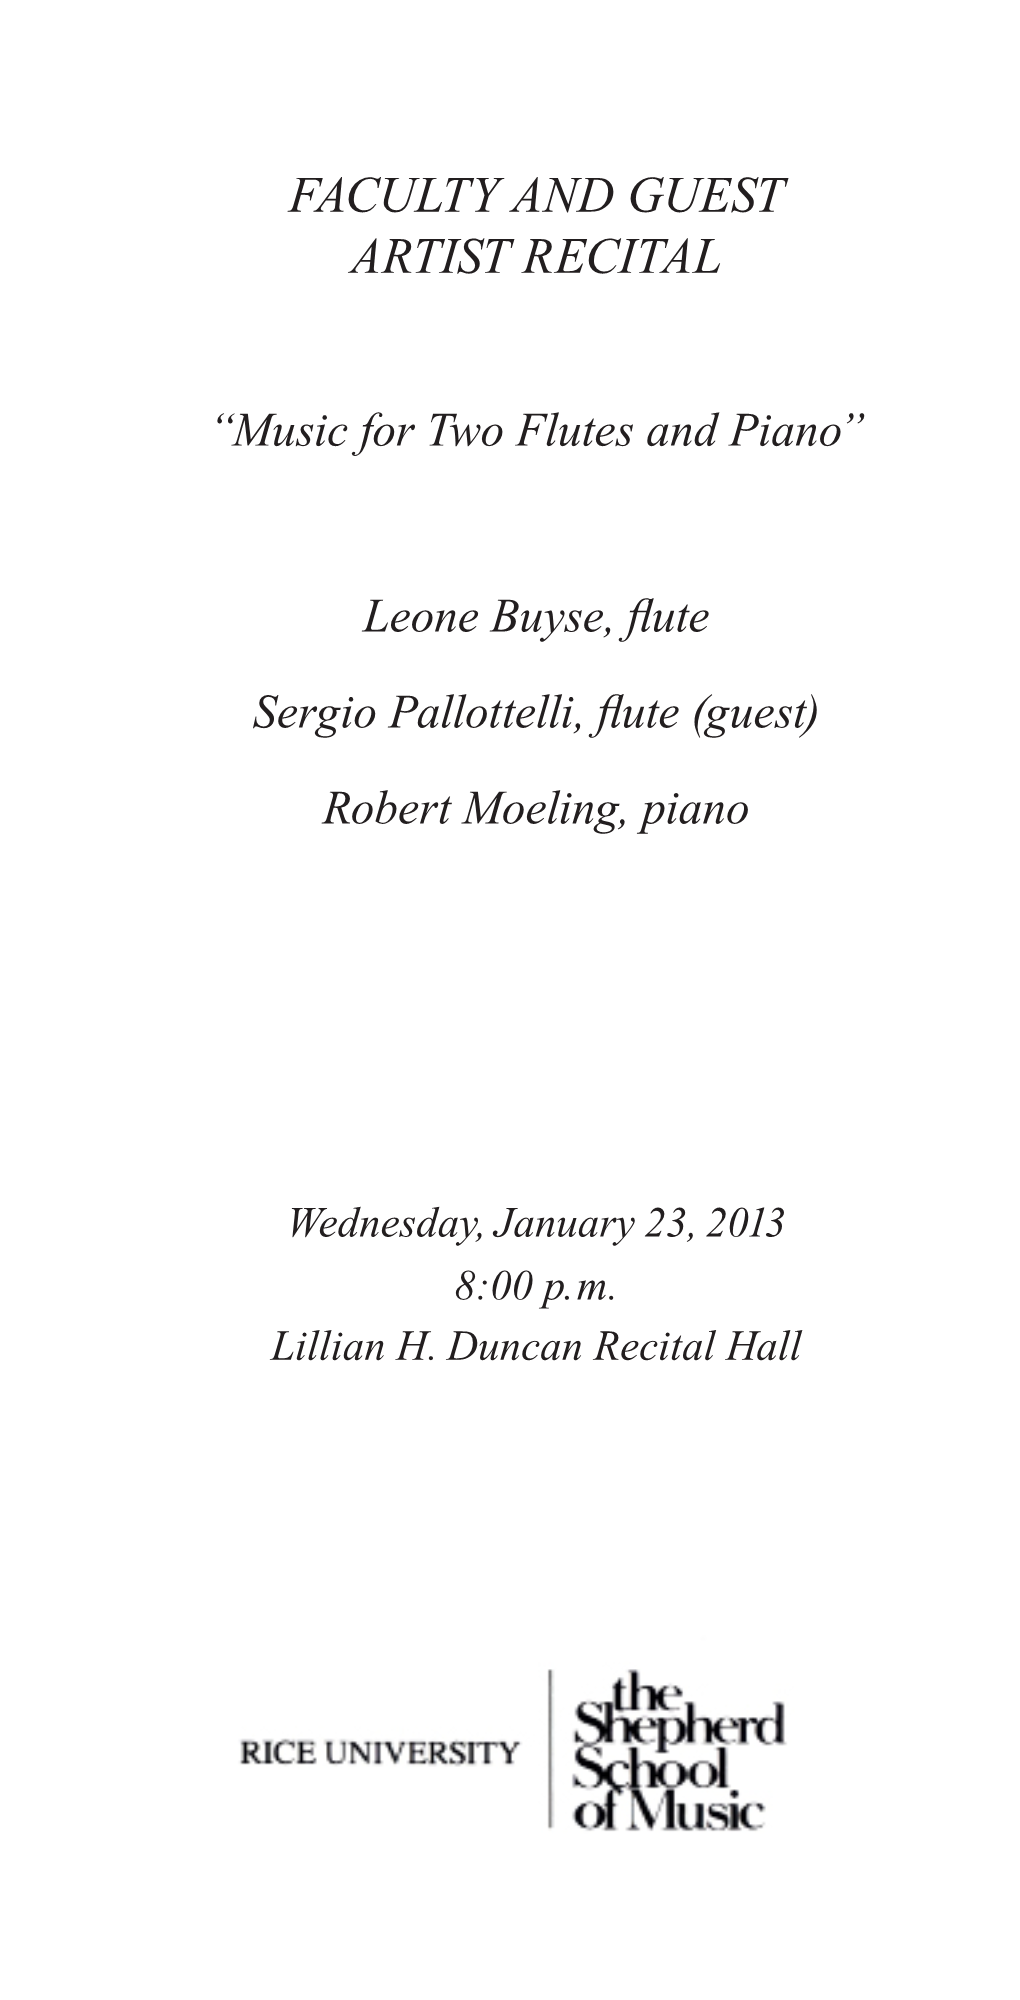 FACULTY and GUEST ARTIST RECITAL January 23, 2013